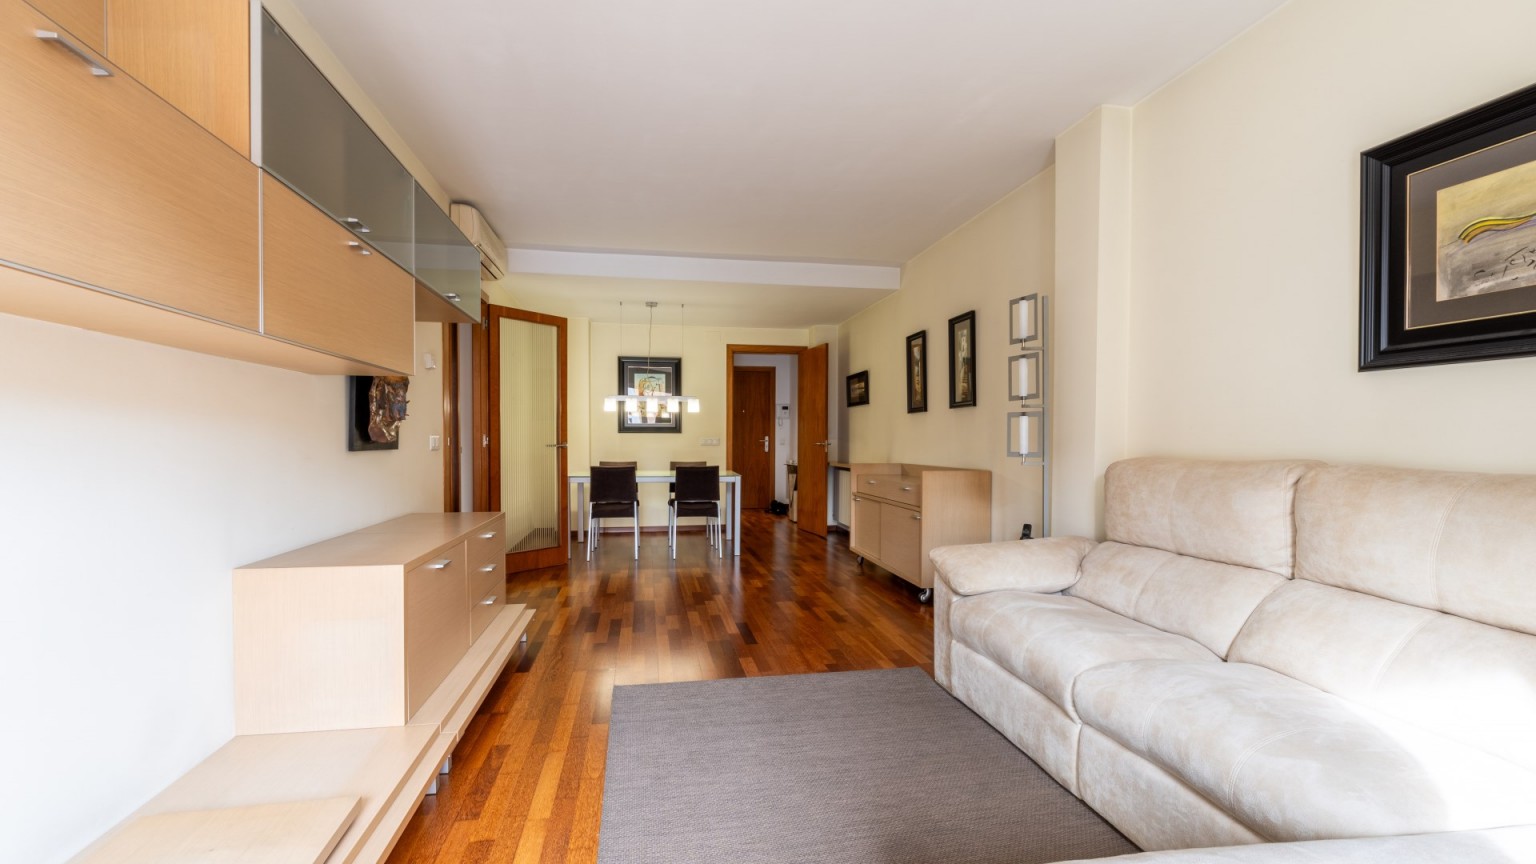 Apartment with two parking spaces for sale in the center of Girona